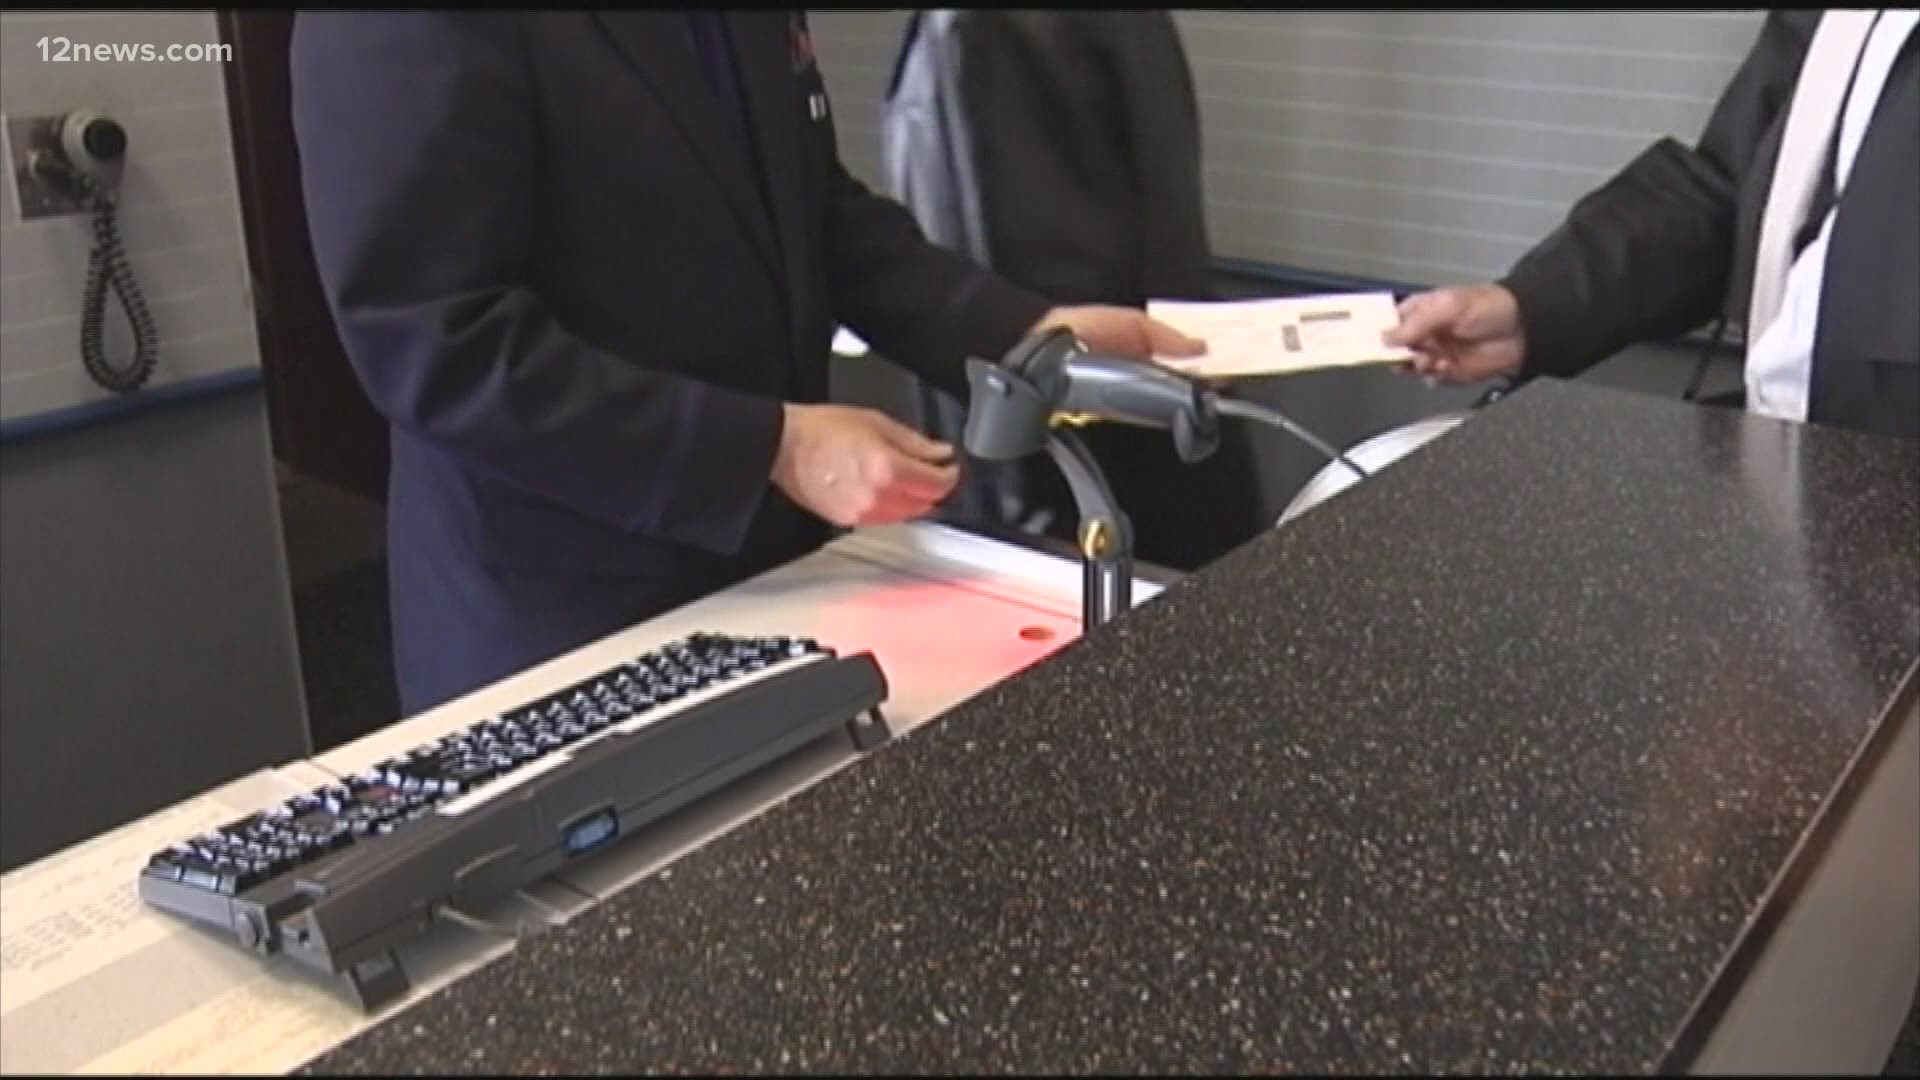 Local and federal efforts are underway to ensure safe and smart ways to get travel plans back on the books.